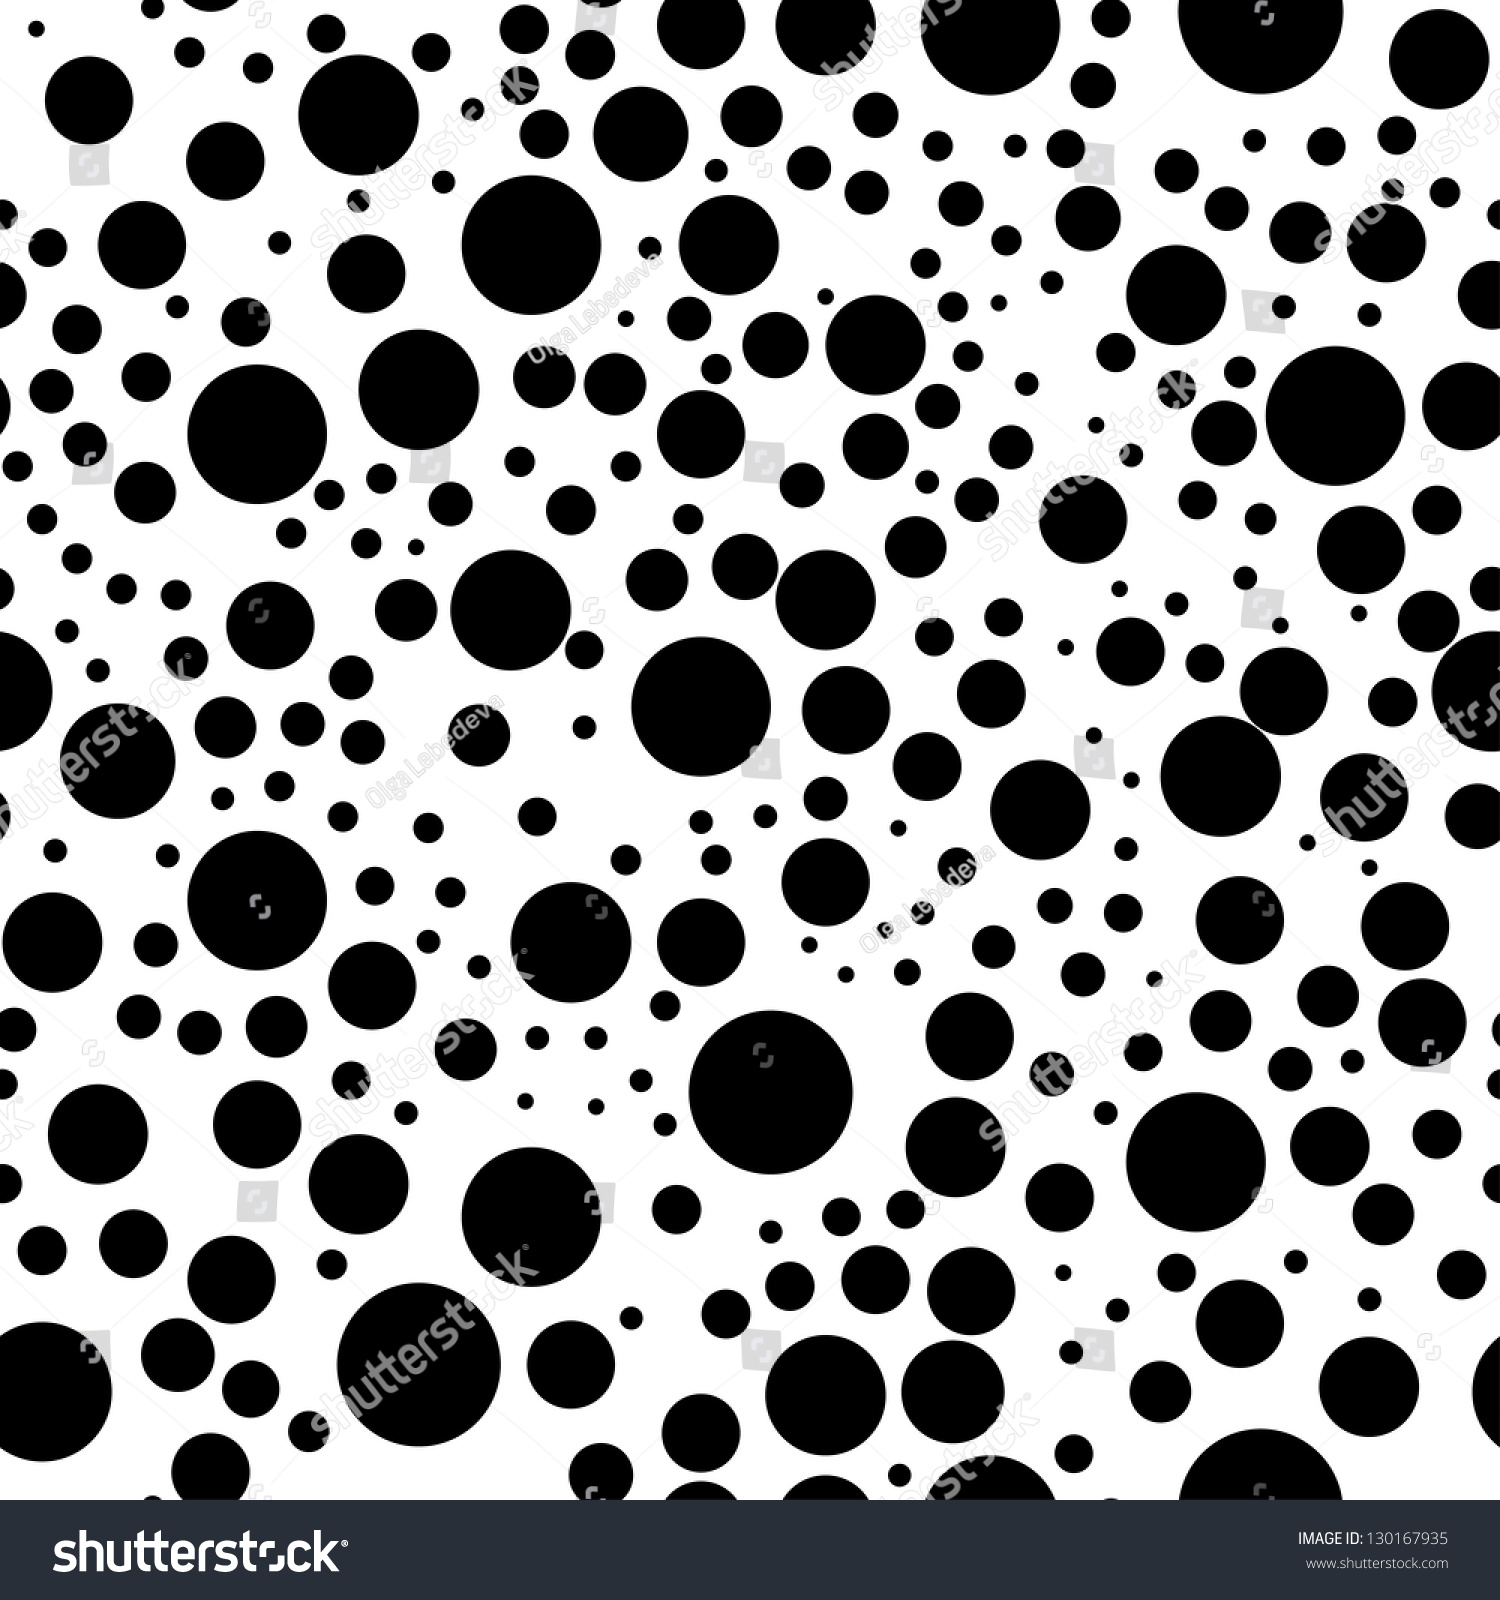 Abstract Background With Black And White Circles. Seamless Pattern ...